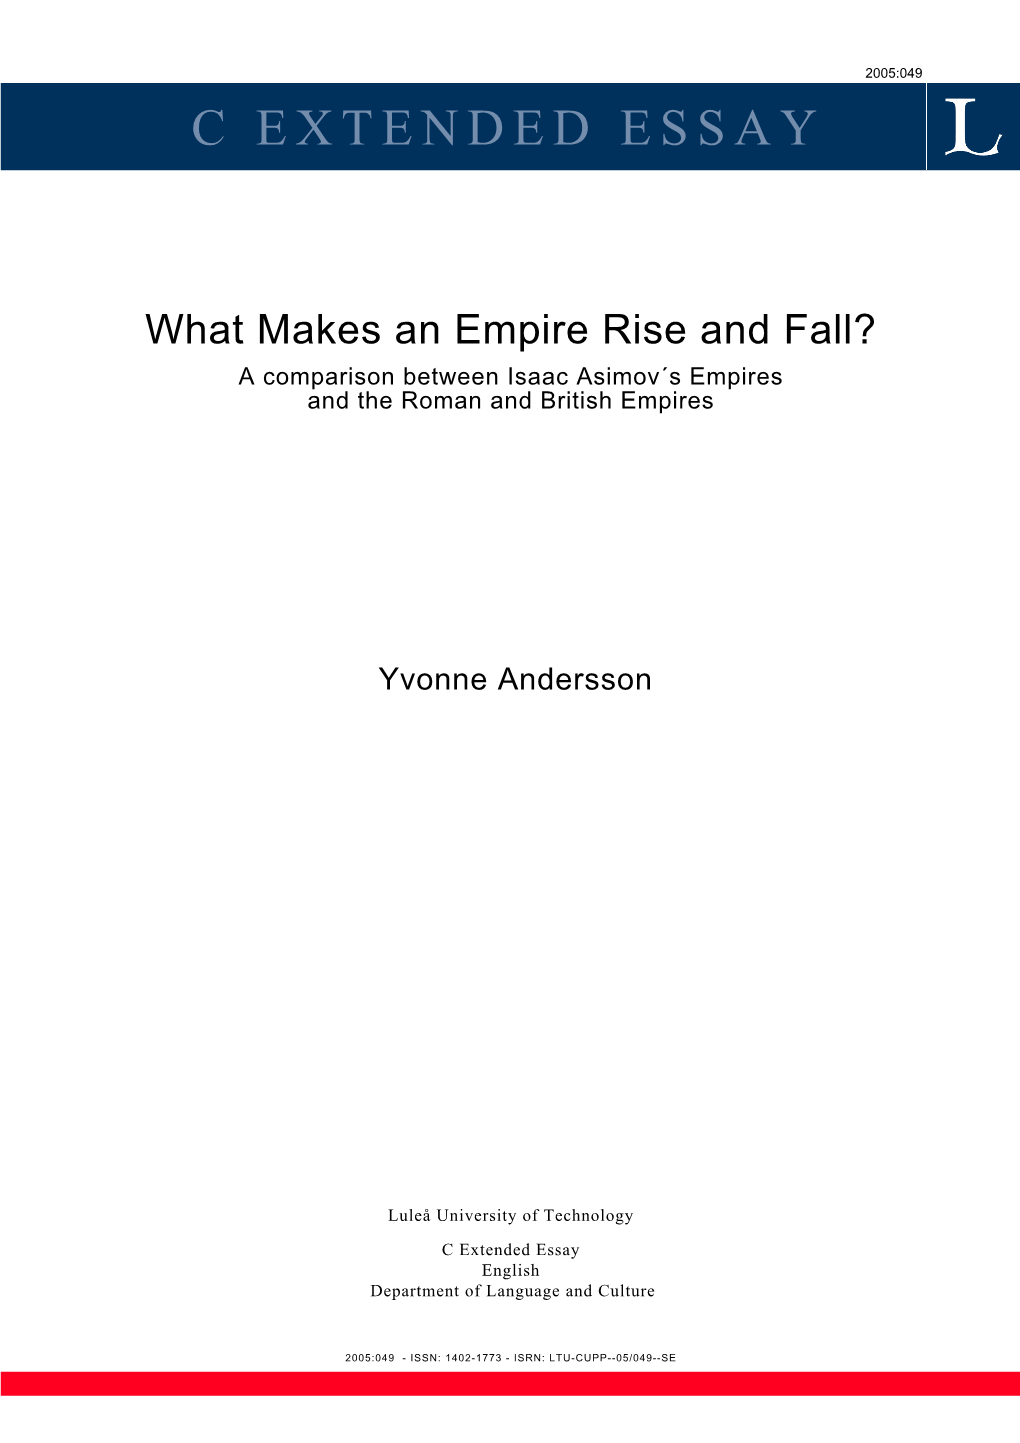 What Makes an Empire Rise and Fall? a Comparison Between Isaac Asimov´S Empires and the Roman and British Empires